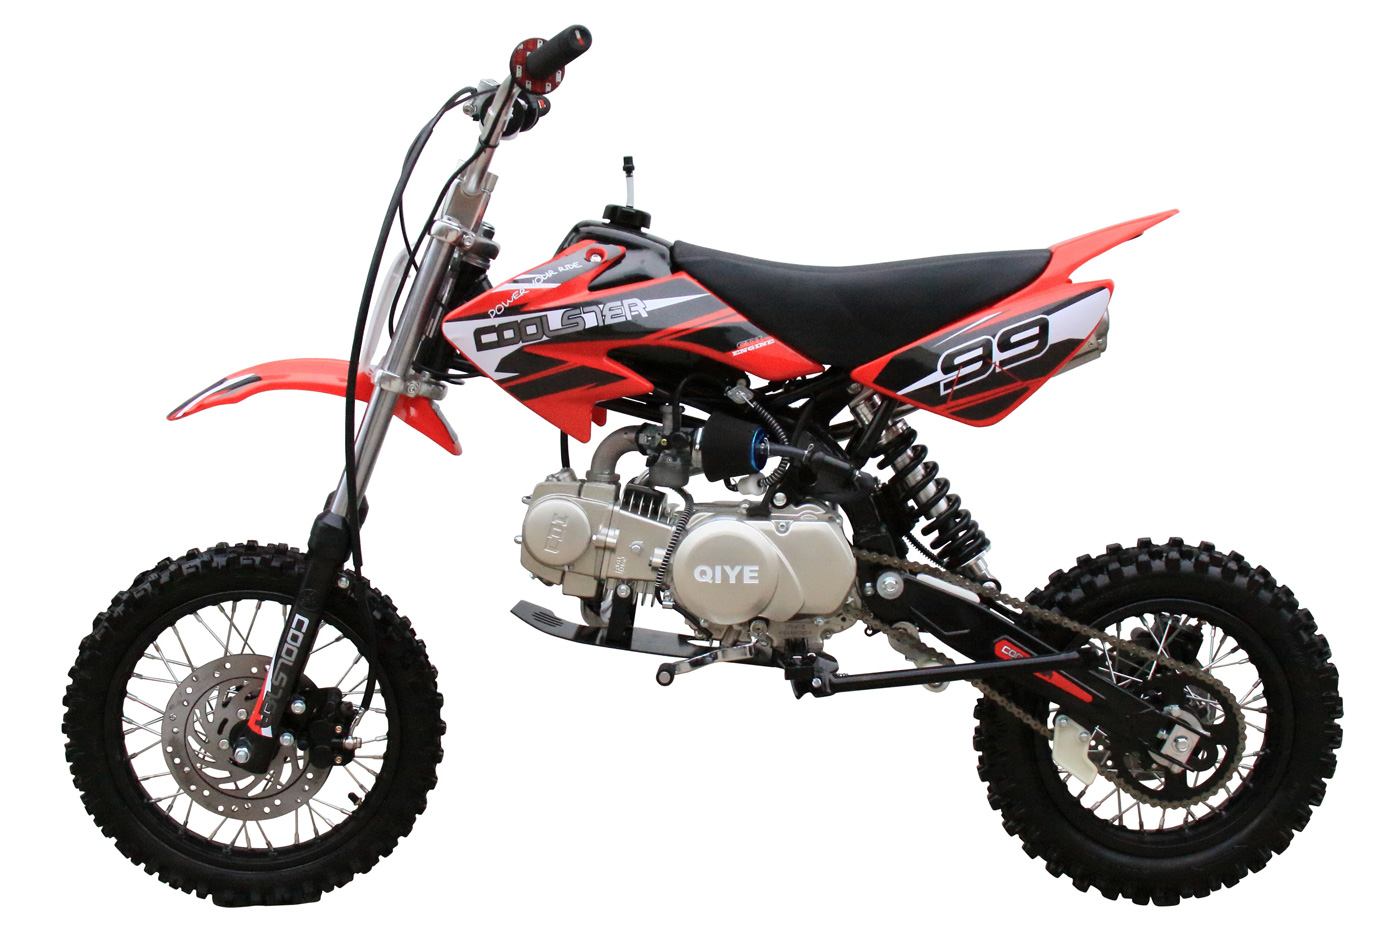 Coolster 125cc XR Semi Auto - Click Image to Close